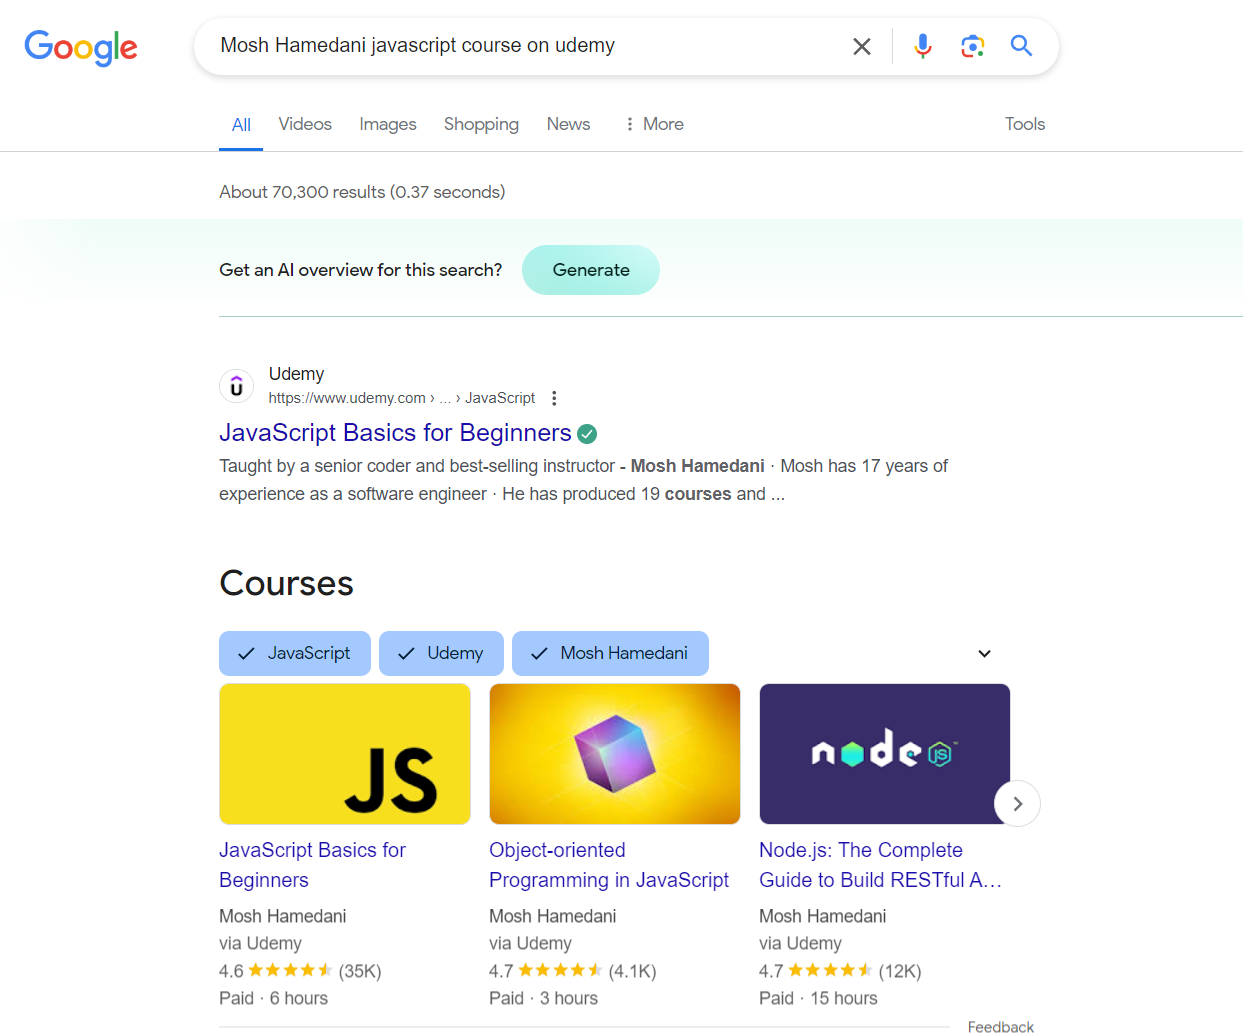 A course rich snippet on Google